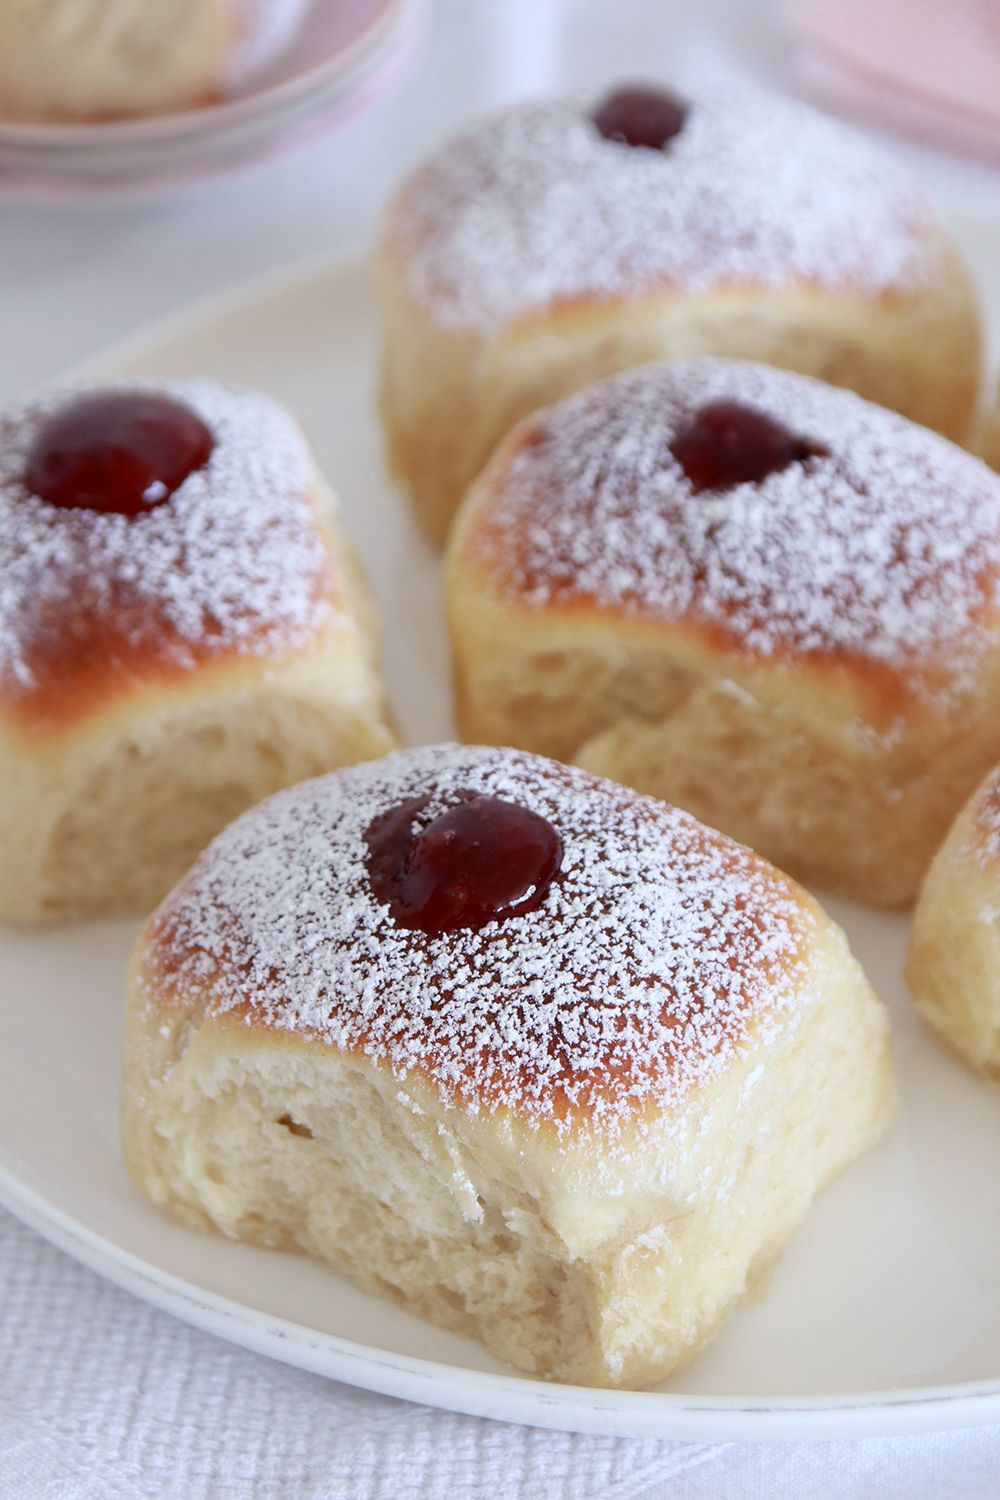 Baked Brioche Doughnuts Filled with Jam | Photo: Natalie Levin